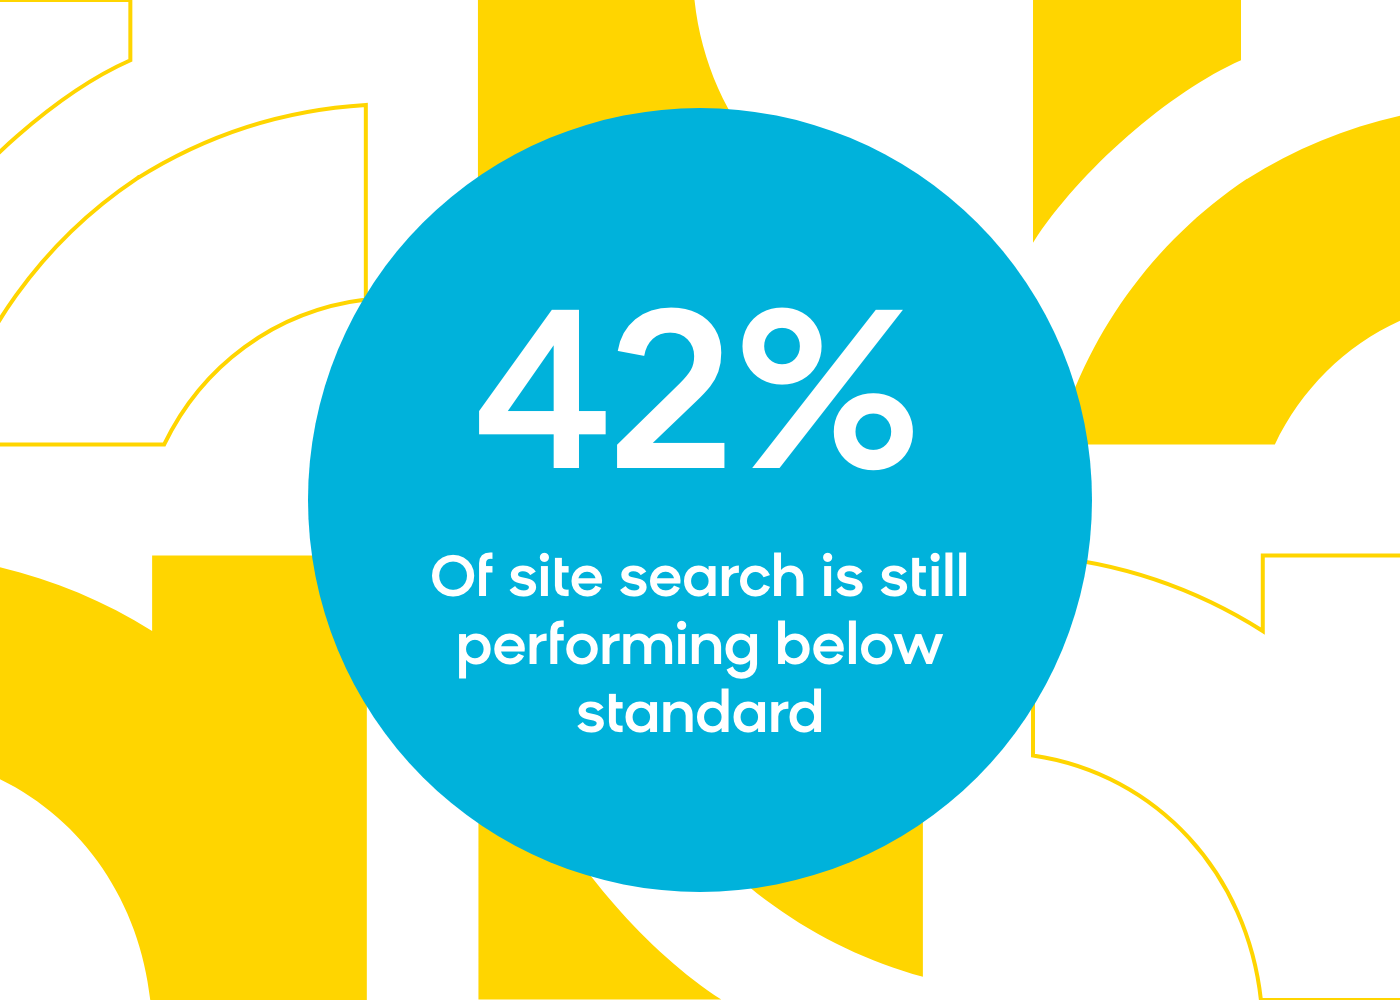 Statistic on Search from Baymard Institute